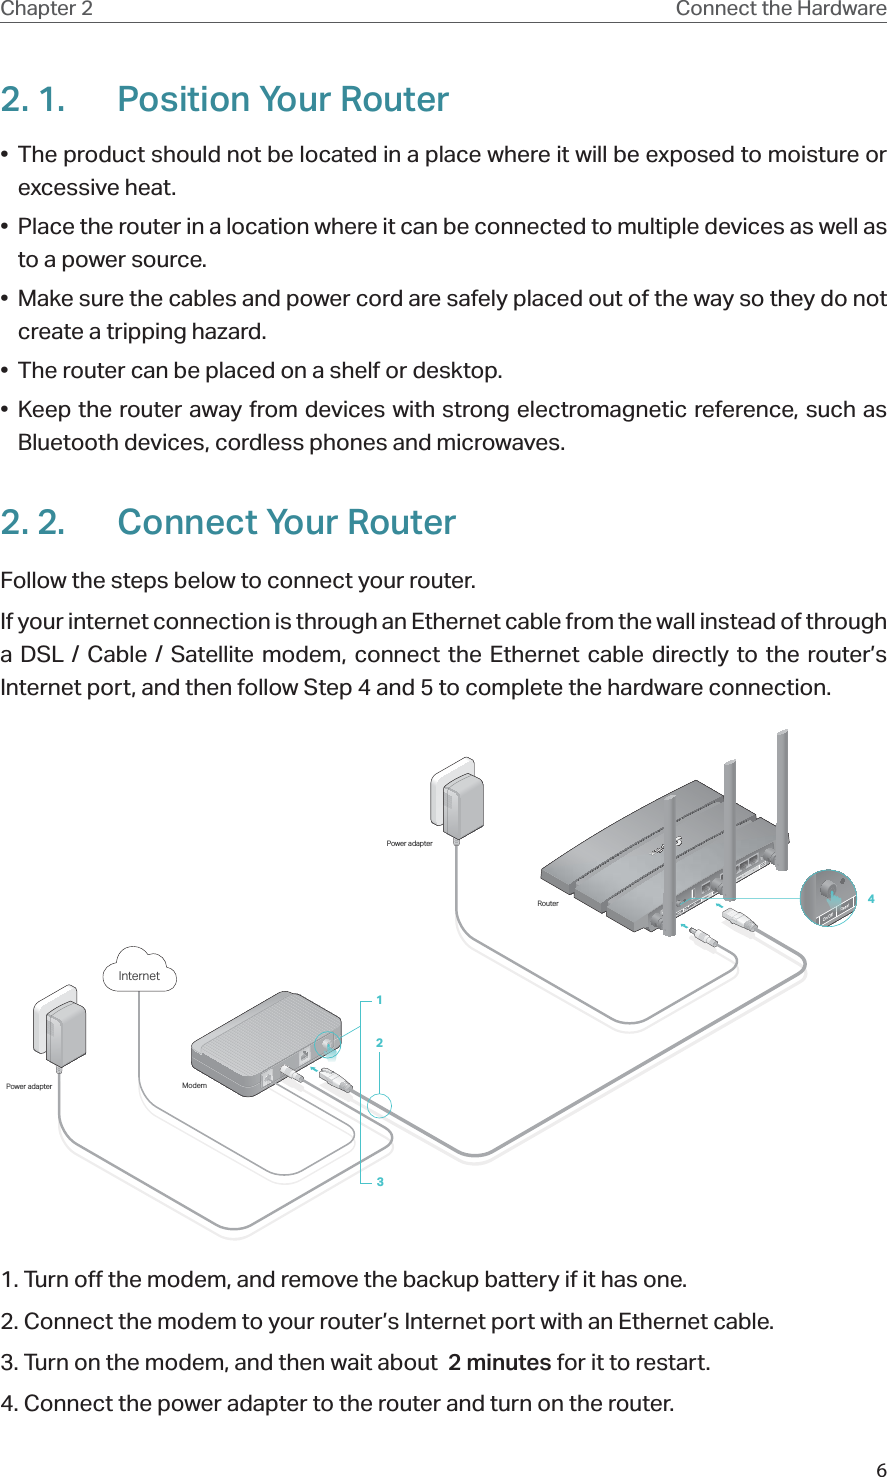 6Chapter 2 Connect the Hardware2. 1.  Position Your Router•  The product should not be located in a place where it will be exposed to moisture or excessive heat.•  Place the router in a location where it can be connected to multiple devices as well as to a power source.•  Make sure the cables and power cord are safely placed out of the way so they do not create a tripping hazard.•  The router can be placed on a shelf or desktop.• Keep the router away from devices with strong electromagnetic reference, such as Bluetooth devices, cordless phones and microwaves.2. 2.  Connect Your RouterFollow the steps below to connect your router.If your internet connection is through an Ethernet cable from the wall instead of through a DSL / Cable / Satellite modem, connect the Ethernet cable directly to the router’s Internet port, and then follow Step 4 and 5 to complete the hardware connection.ModemPower adapterPower adapterRouter123Internet41. Turn off the modem, and remove the backup battery if it has one.2. Connect the modem to your router’s Internet port with an Ethernet cable.3. Turn on the modem, and then wait about  2 minutes for it to restart.4. Connect the power adapter to the router and turn on the router.